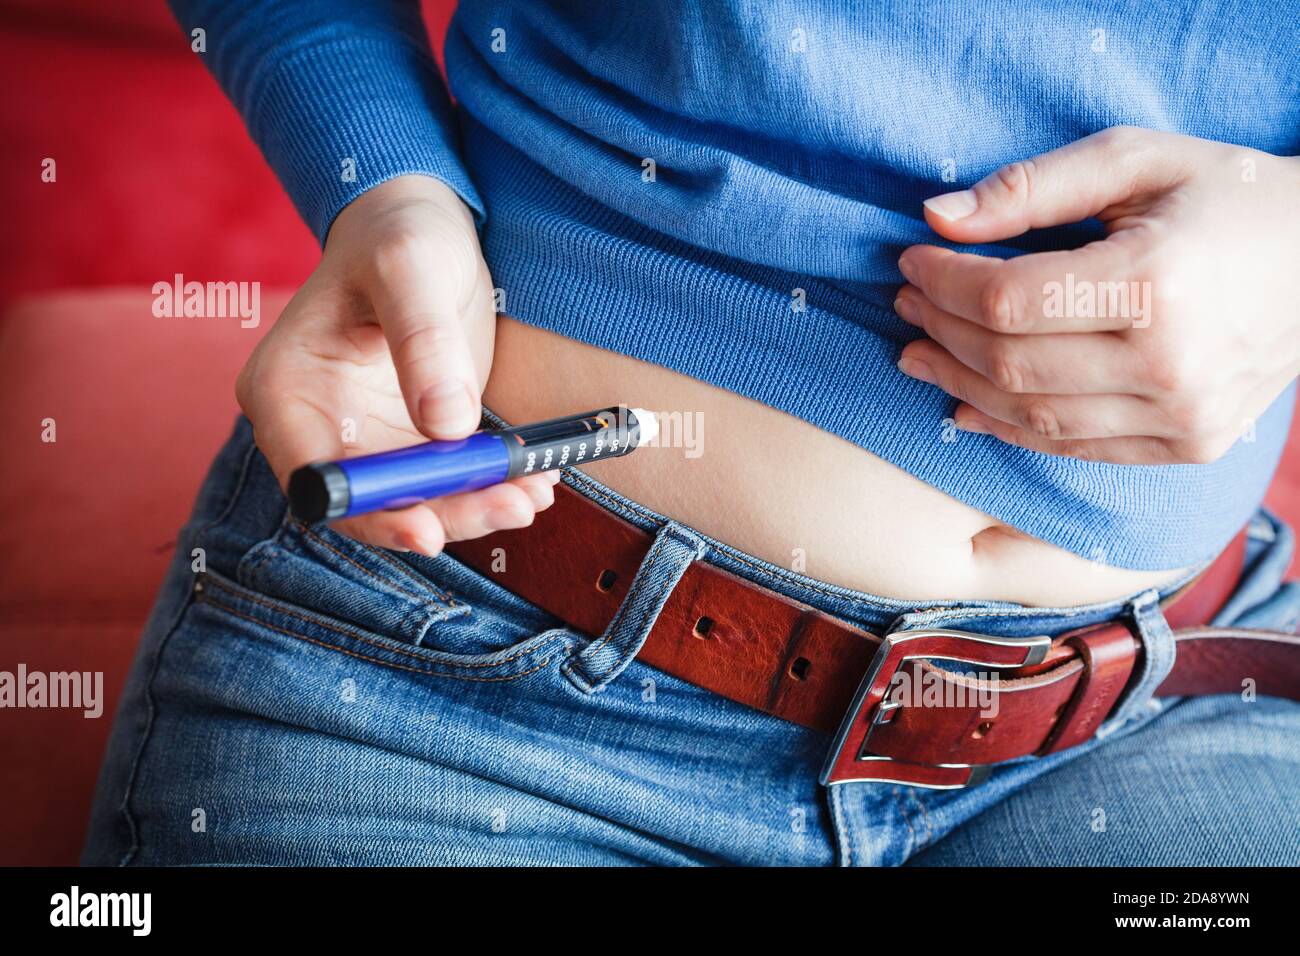 Woman is injecting insuline into her stomach Stock Photo